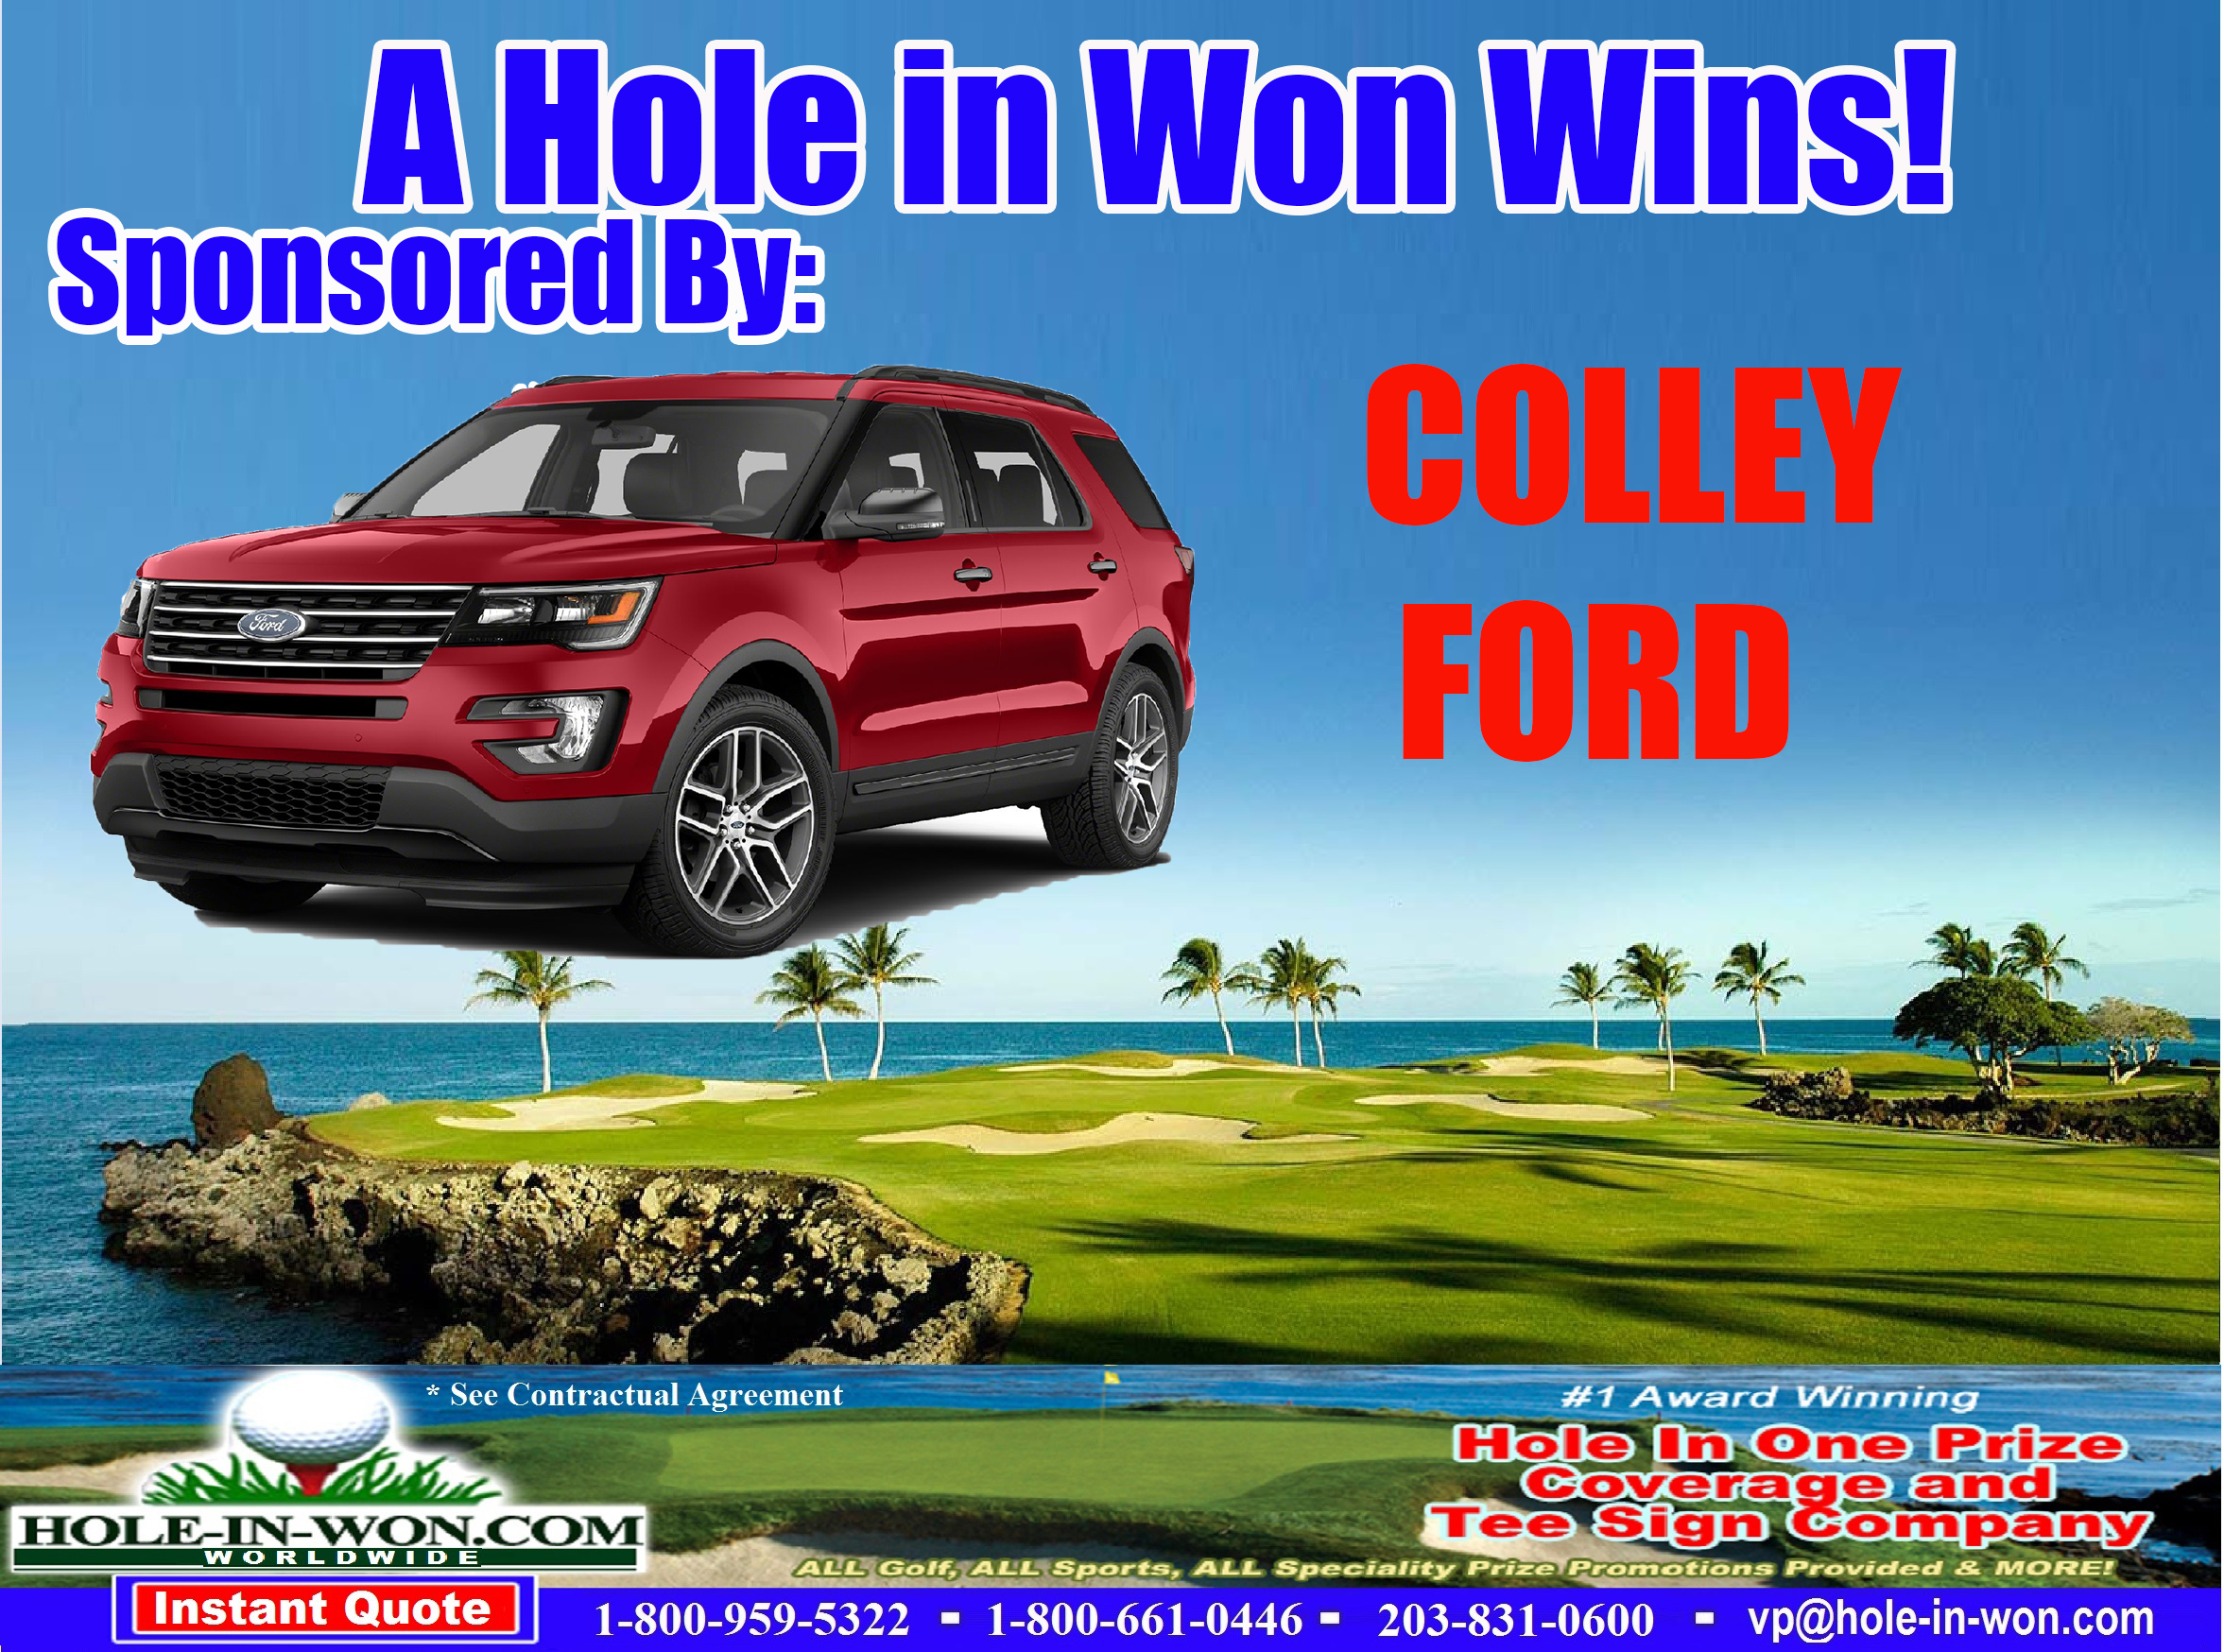 Ford hole in one program #1